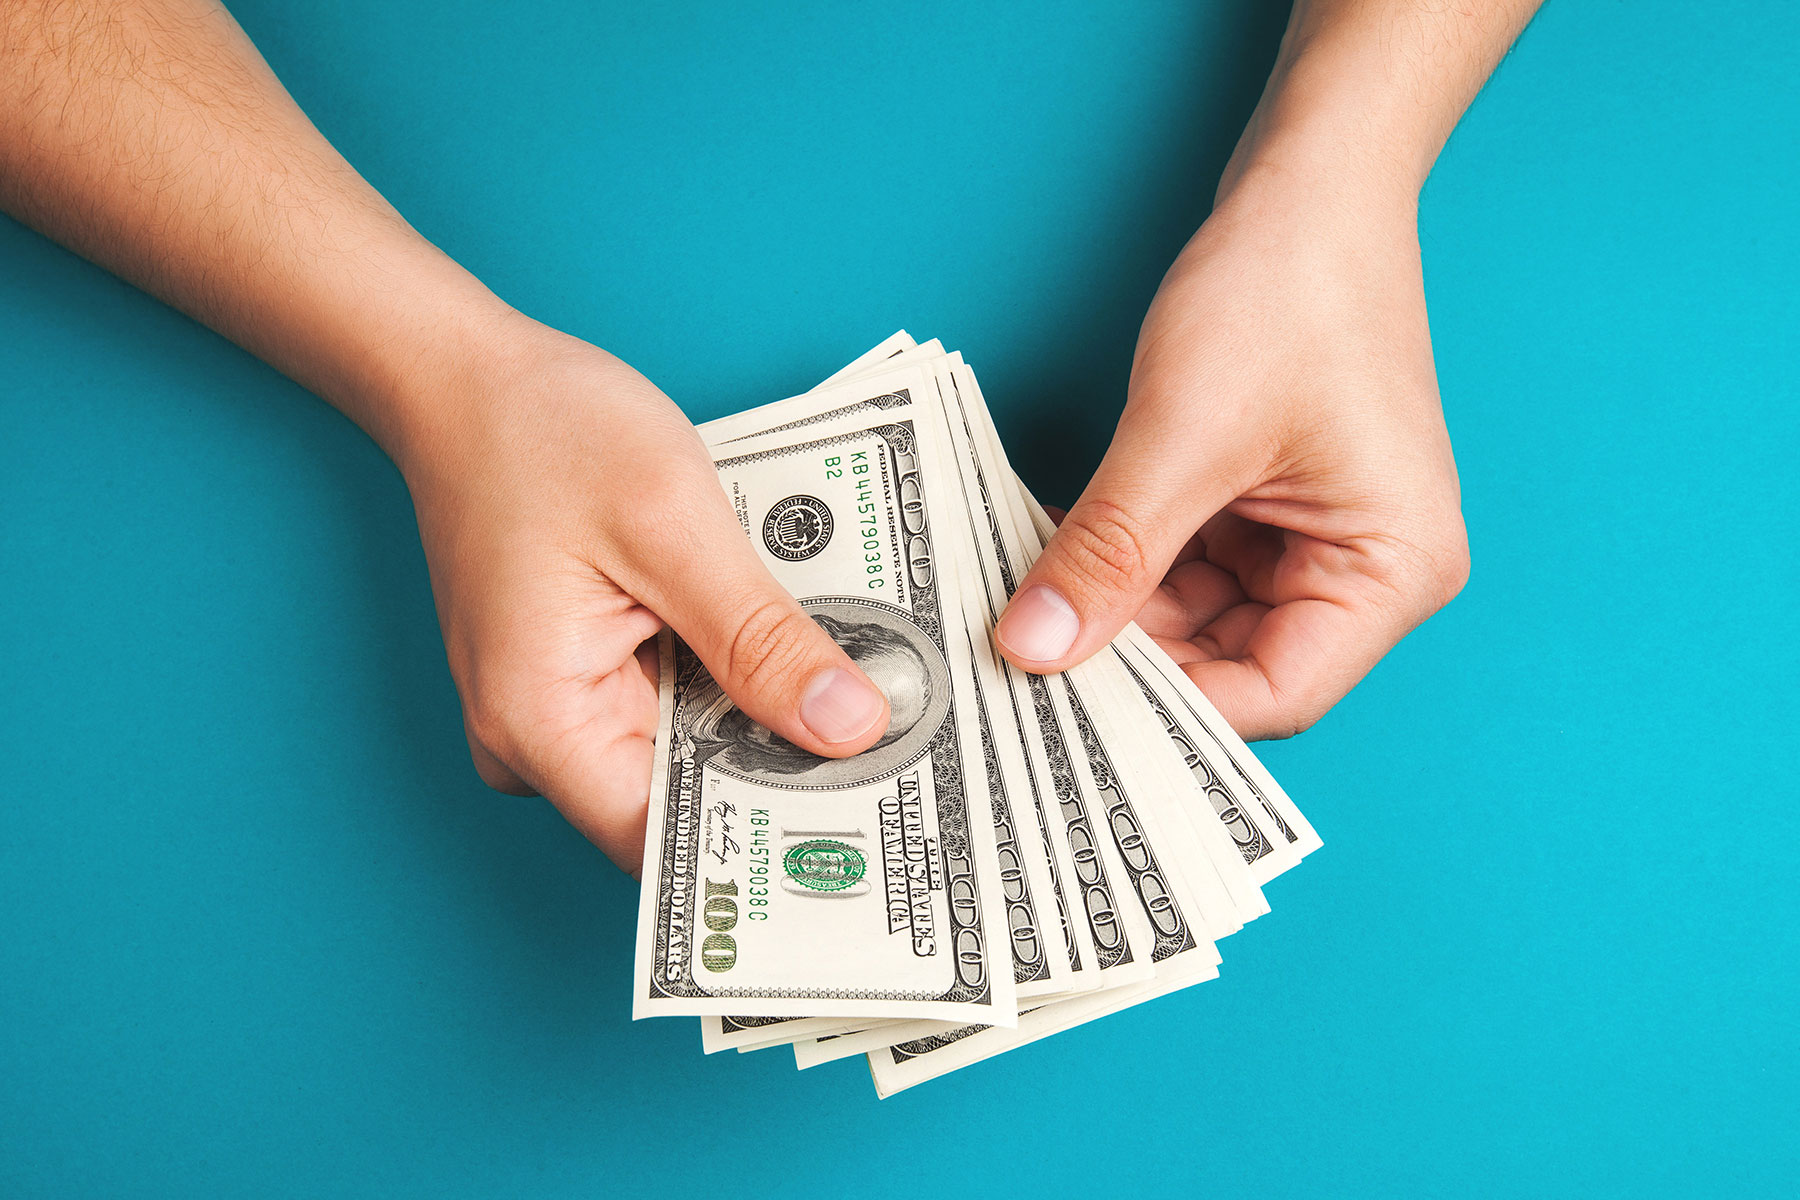 Hands holding money over a bright blue background